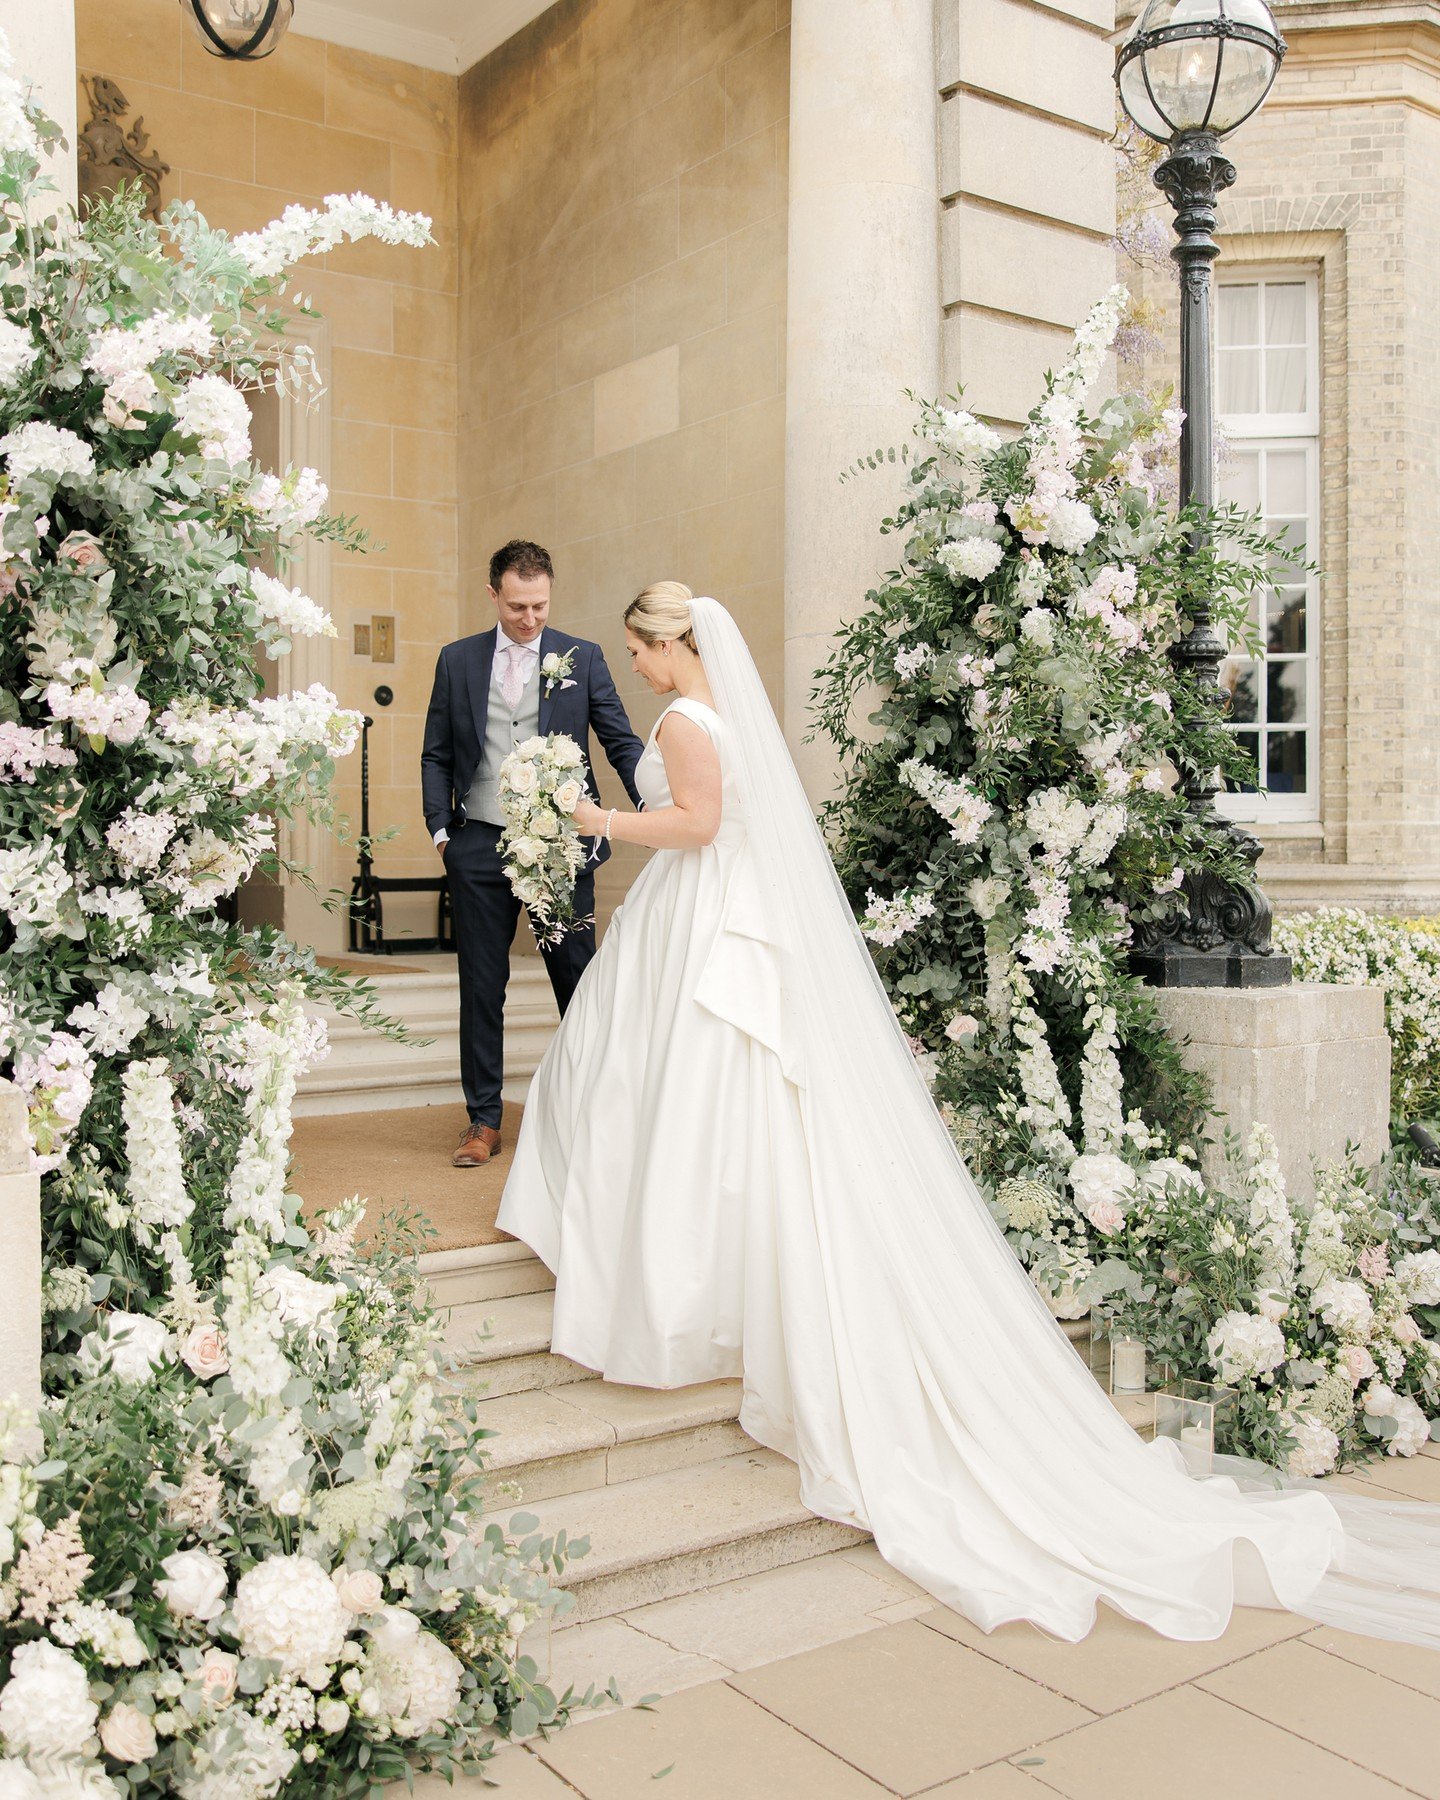 Emma &amp; Dan's wedding took us to floral heaven! When your bride is the niece of a talented florist you'd expect the blooms to be beautiful, but wow 😍😍😍

Hedsor provided the perfect backdrop as always for this joyful, emotional spring wedding. E